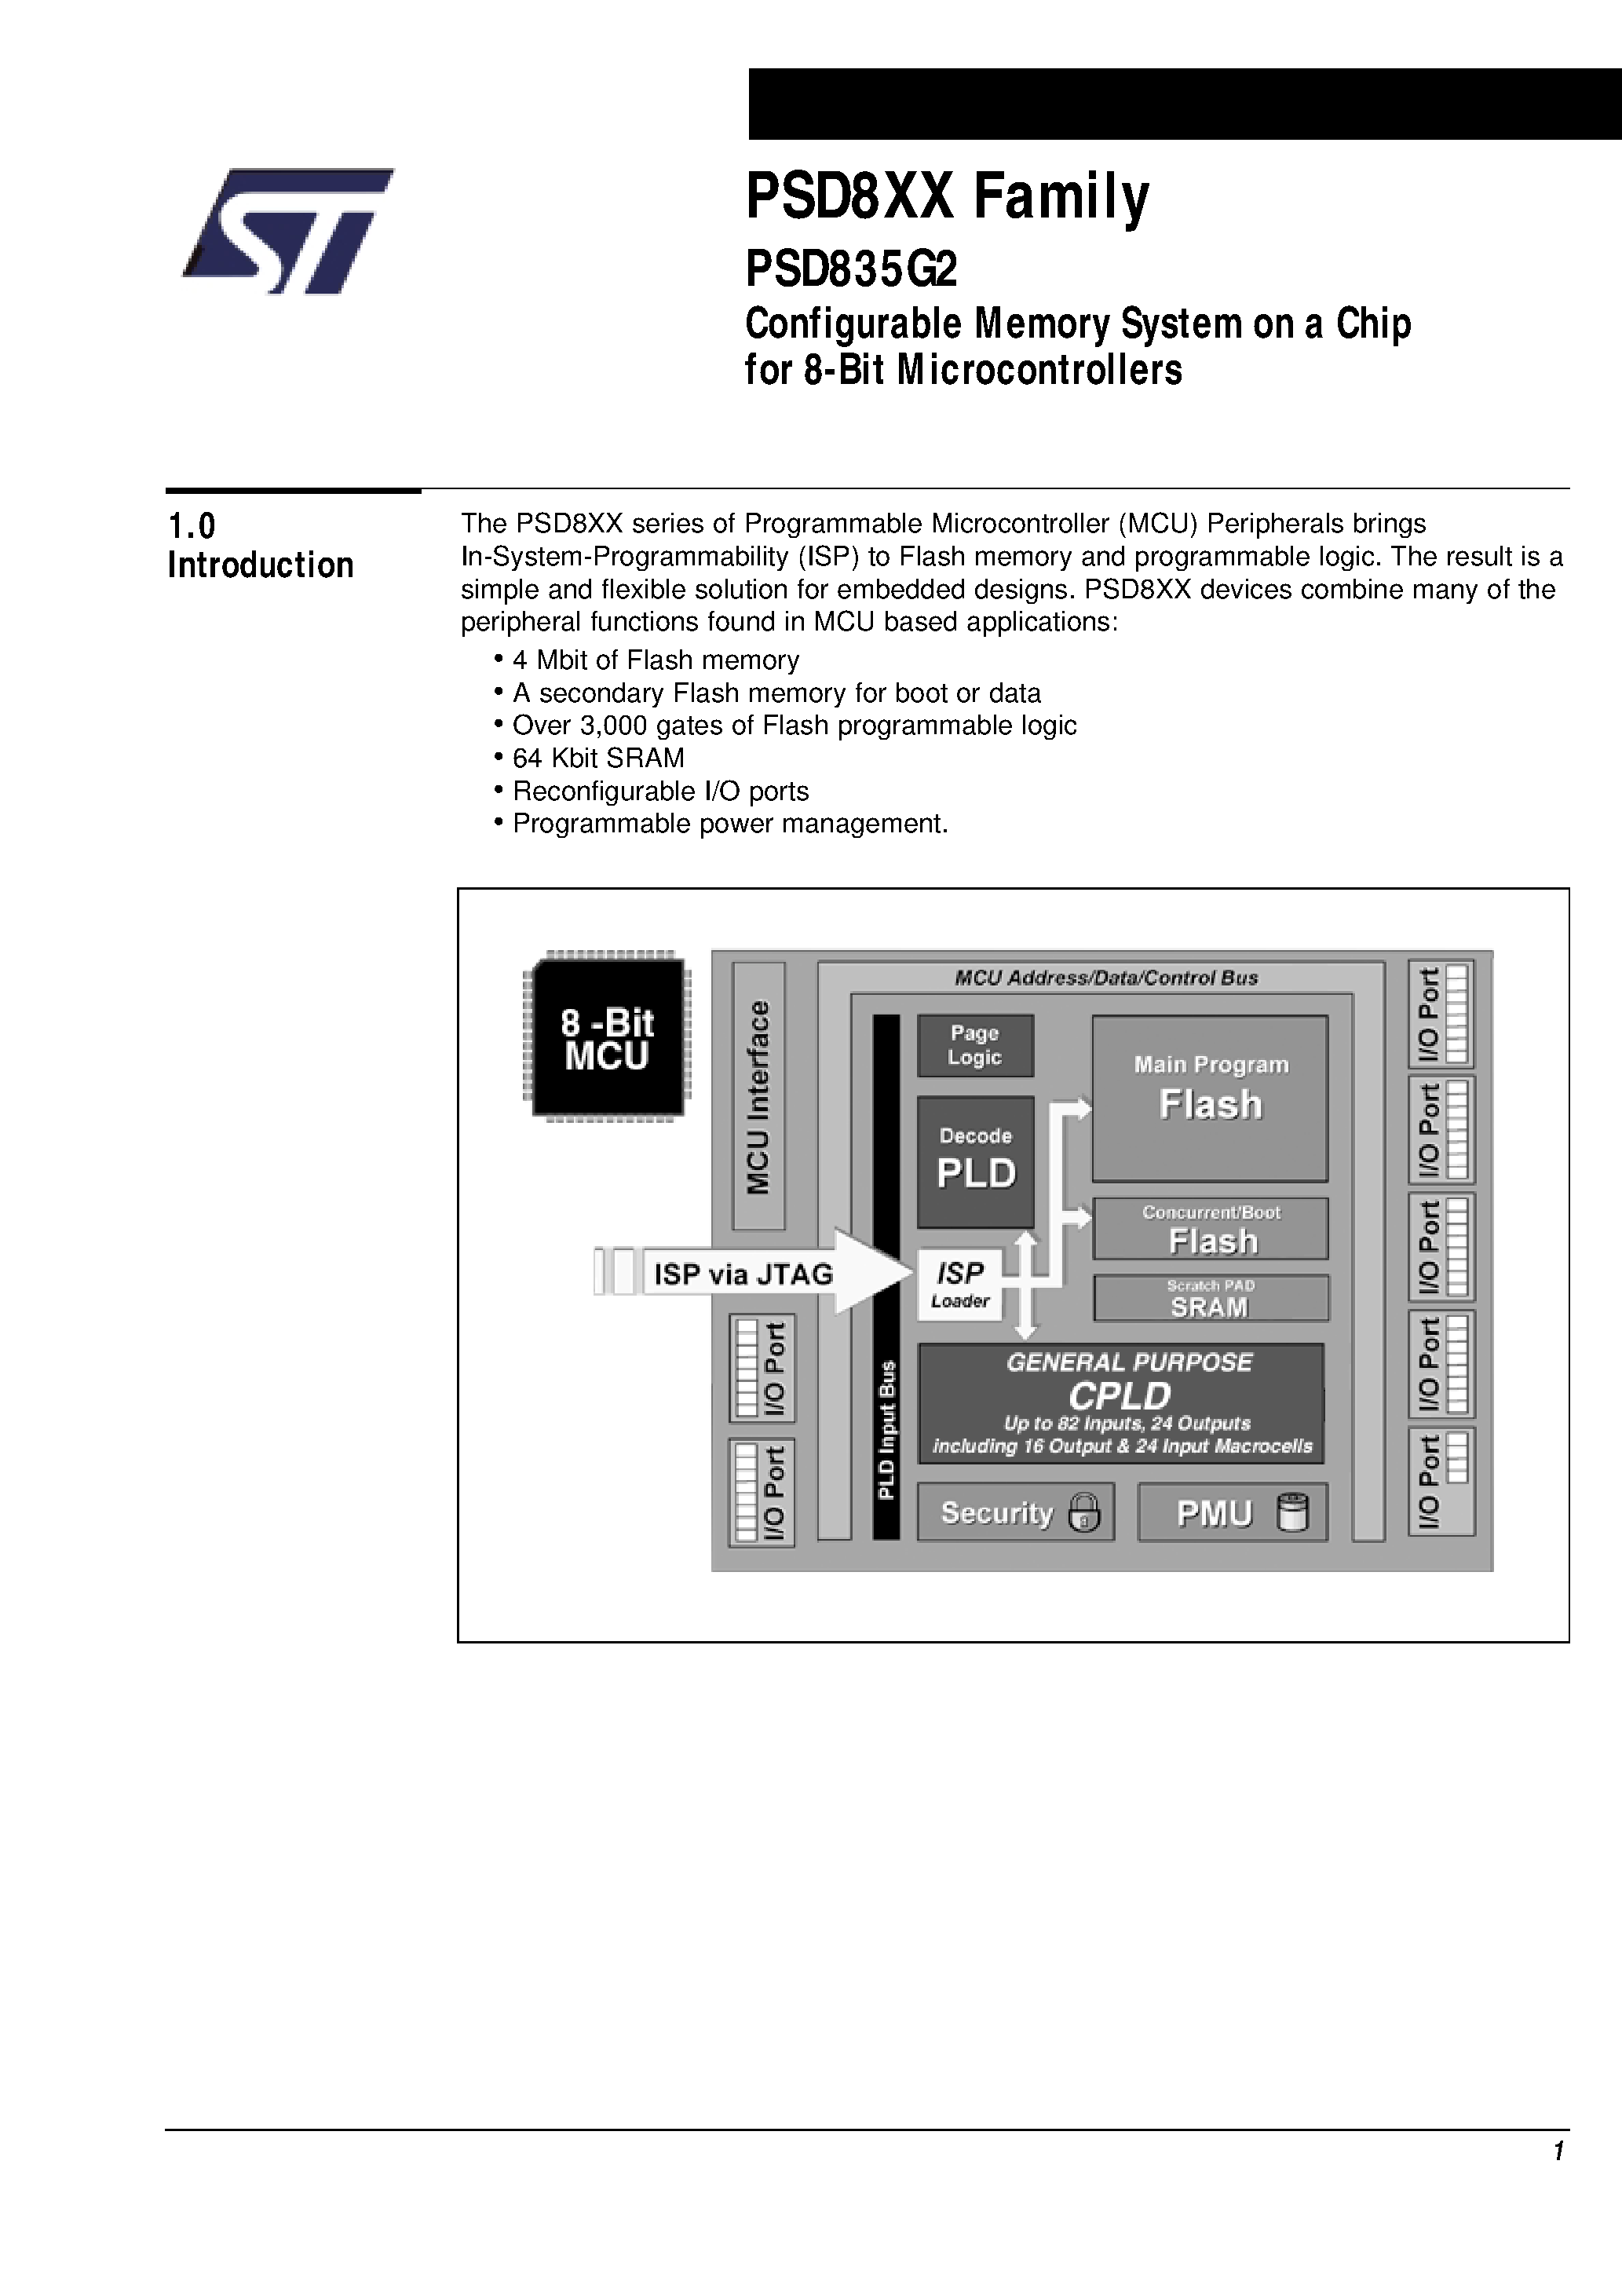 Datasheet PSD835F1V-A-12J - Configurable Memory System on a Chip for 8-Bit Microcontrollers page 2